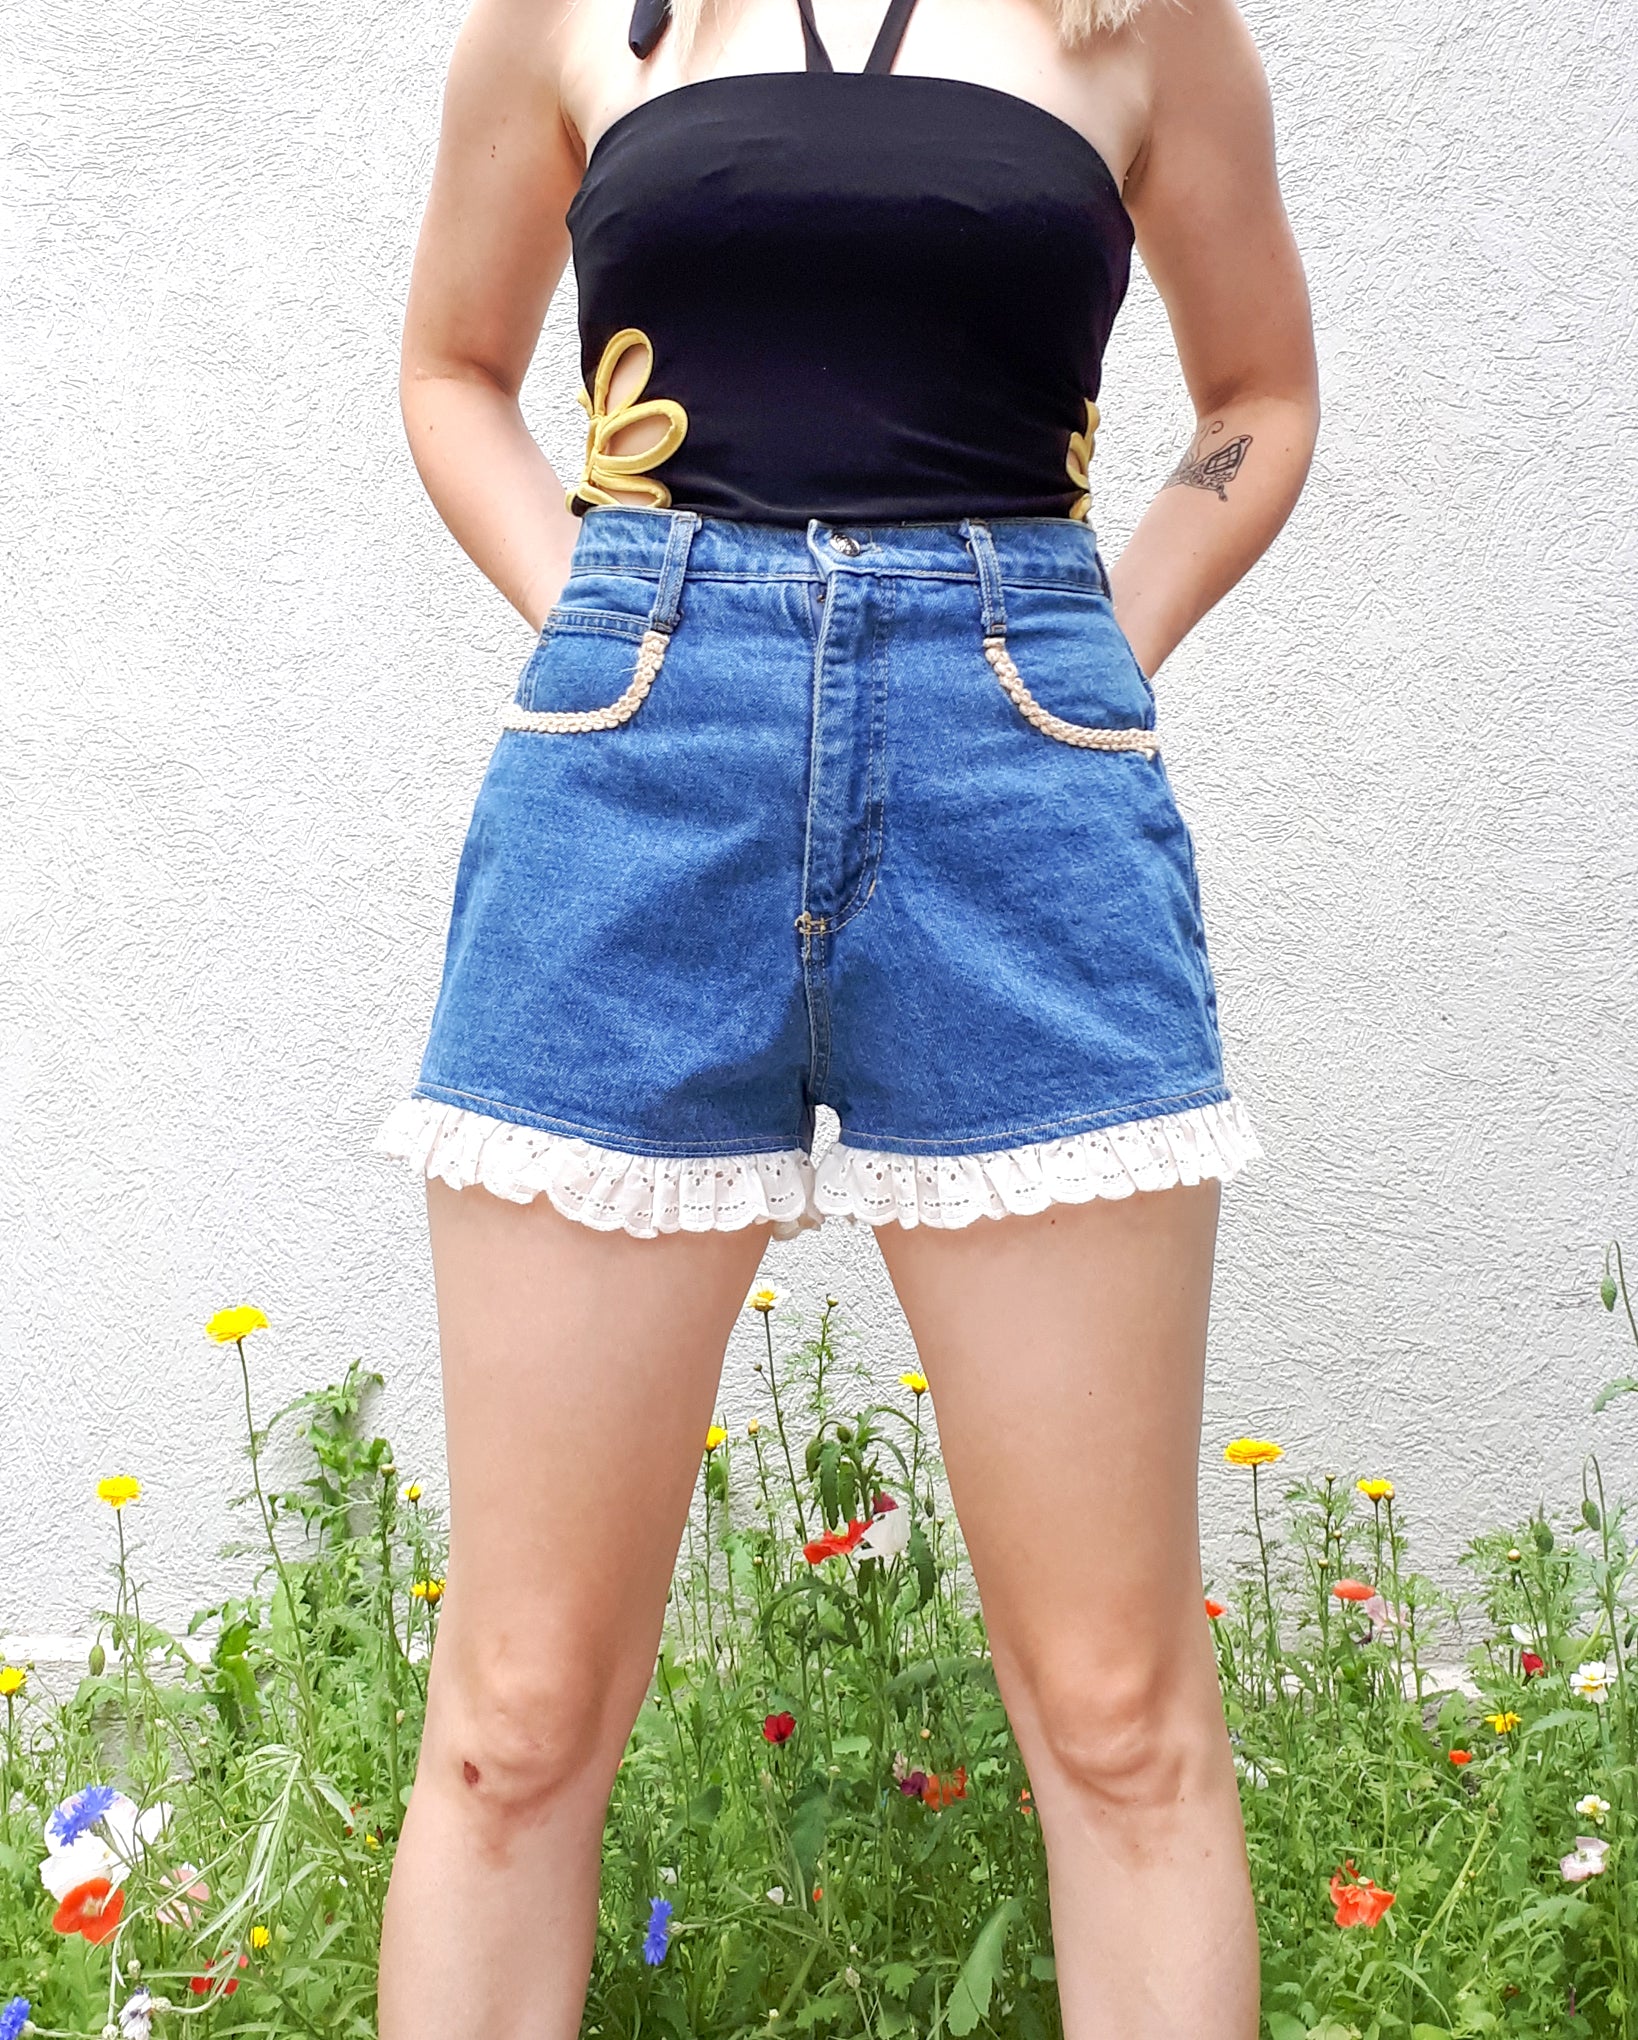 Vintage 90s Shorts Jean Shorts High Rise, Size 26/27 With Cotton Lace Eyelet Ruffle